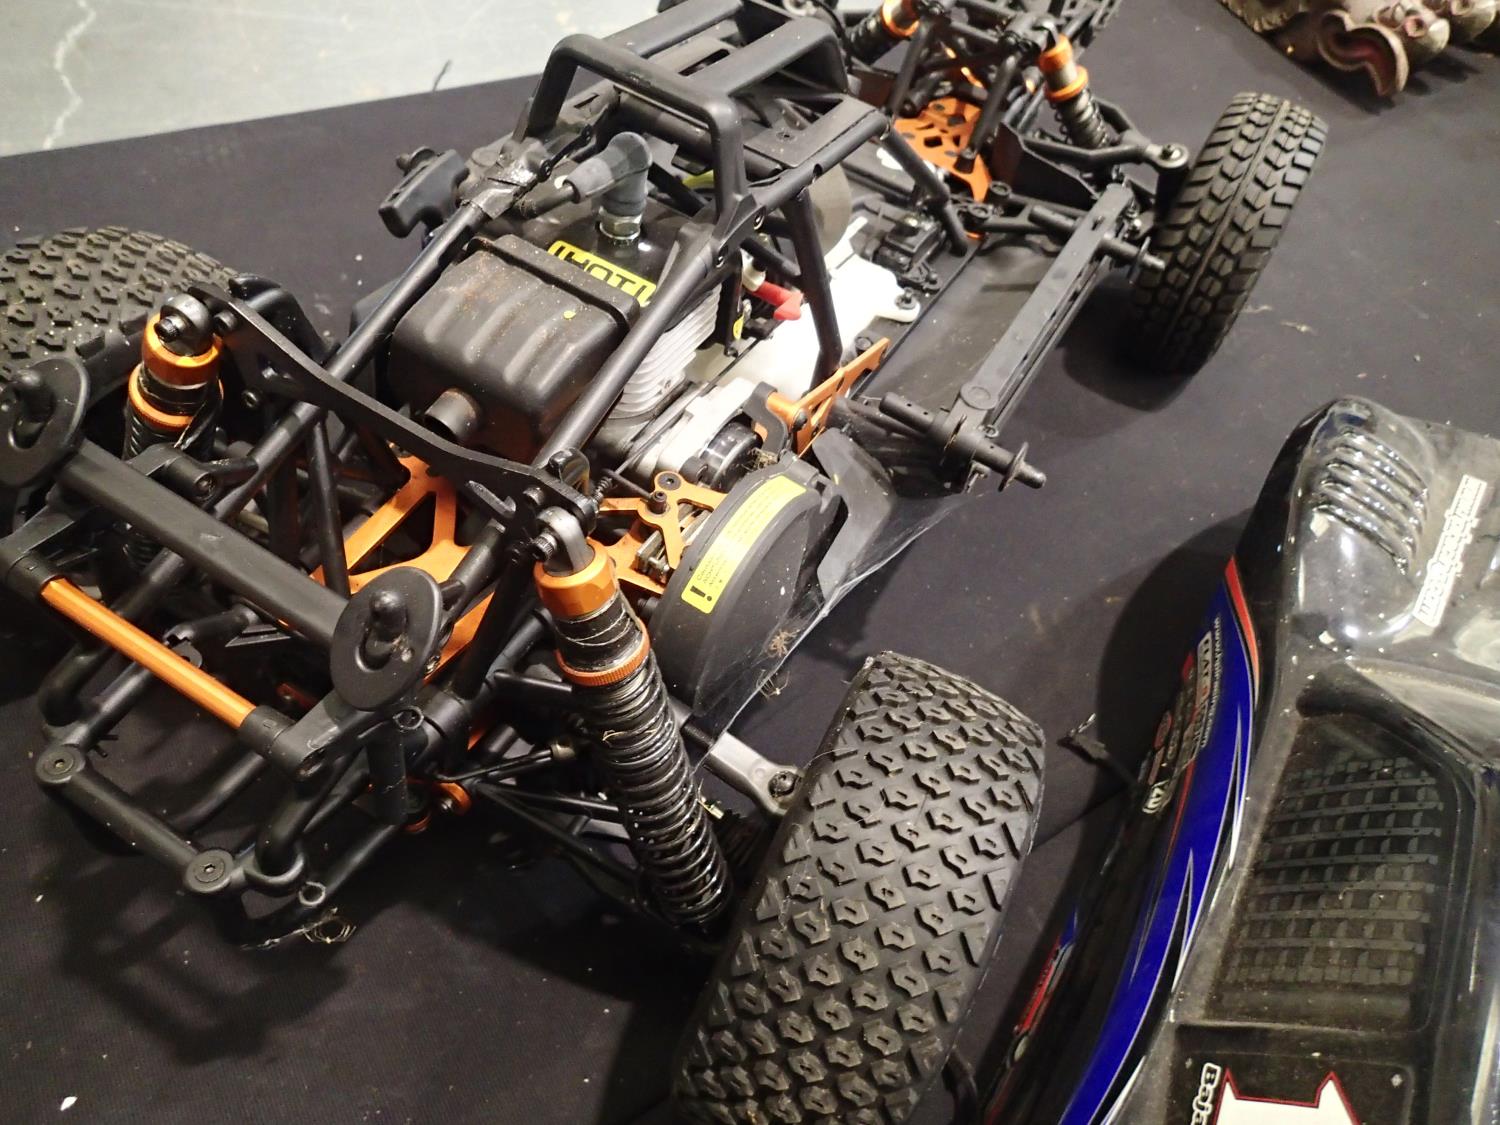 HPI Racing Baja 5T buggy, two stroke 26cc petrol engine with pull start, appears little used/ - Image 3 of 6